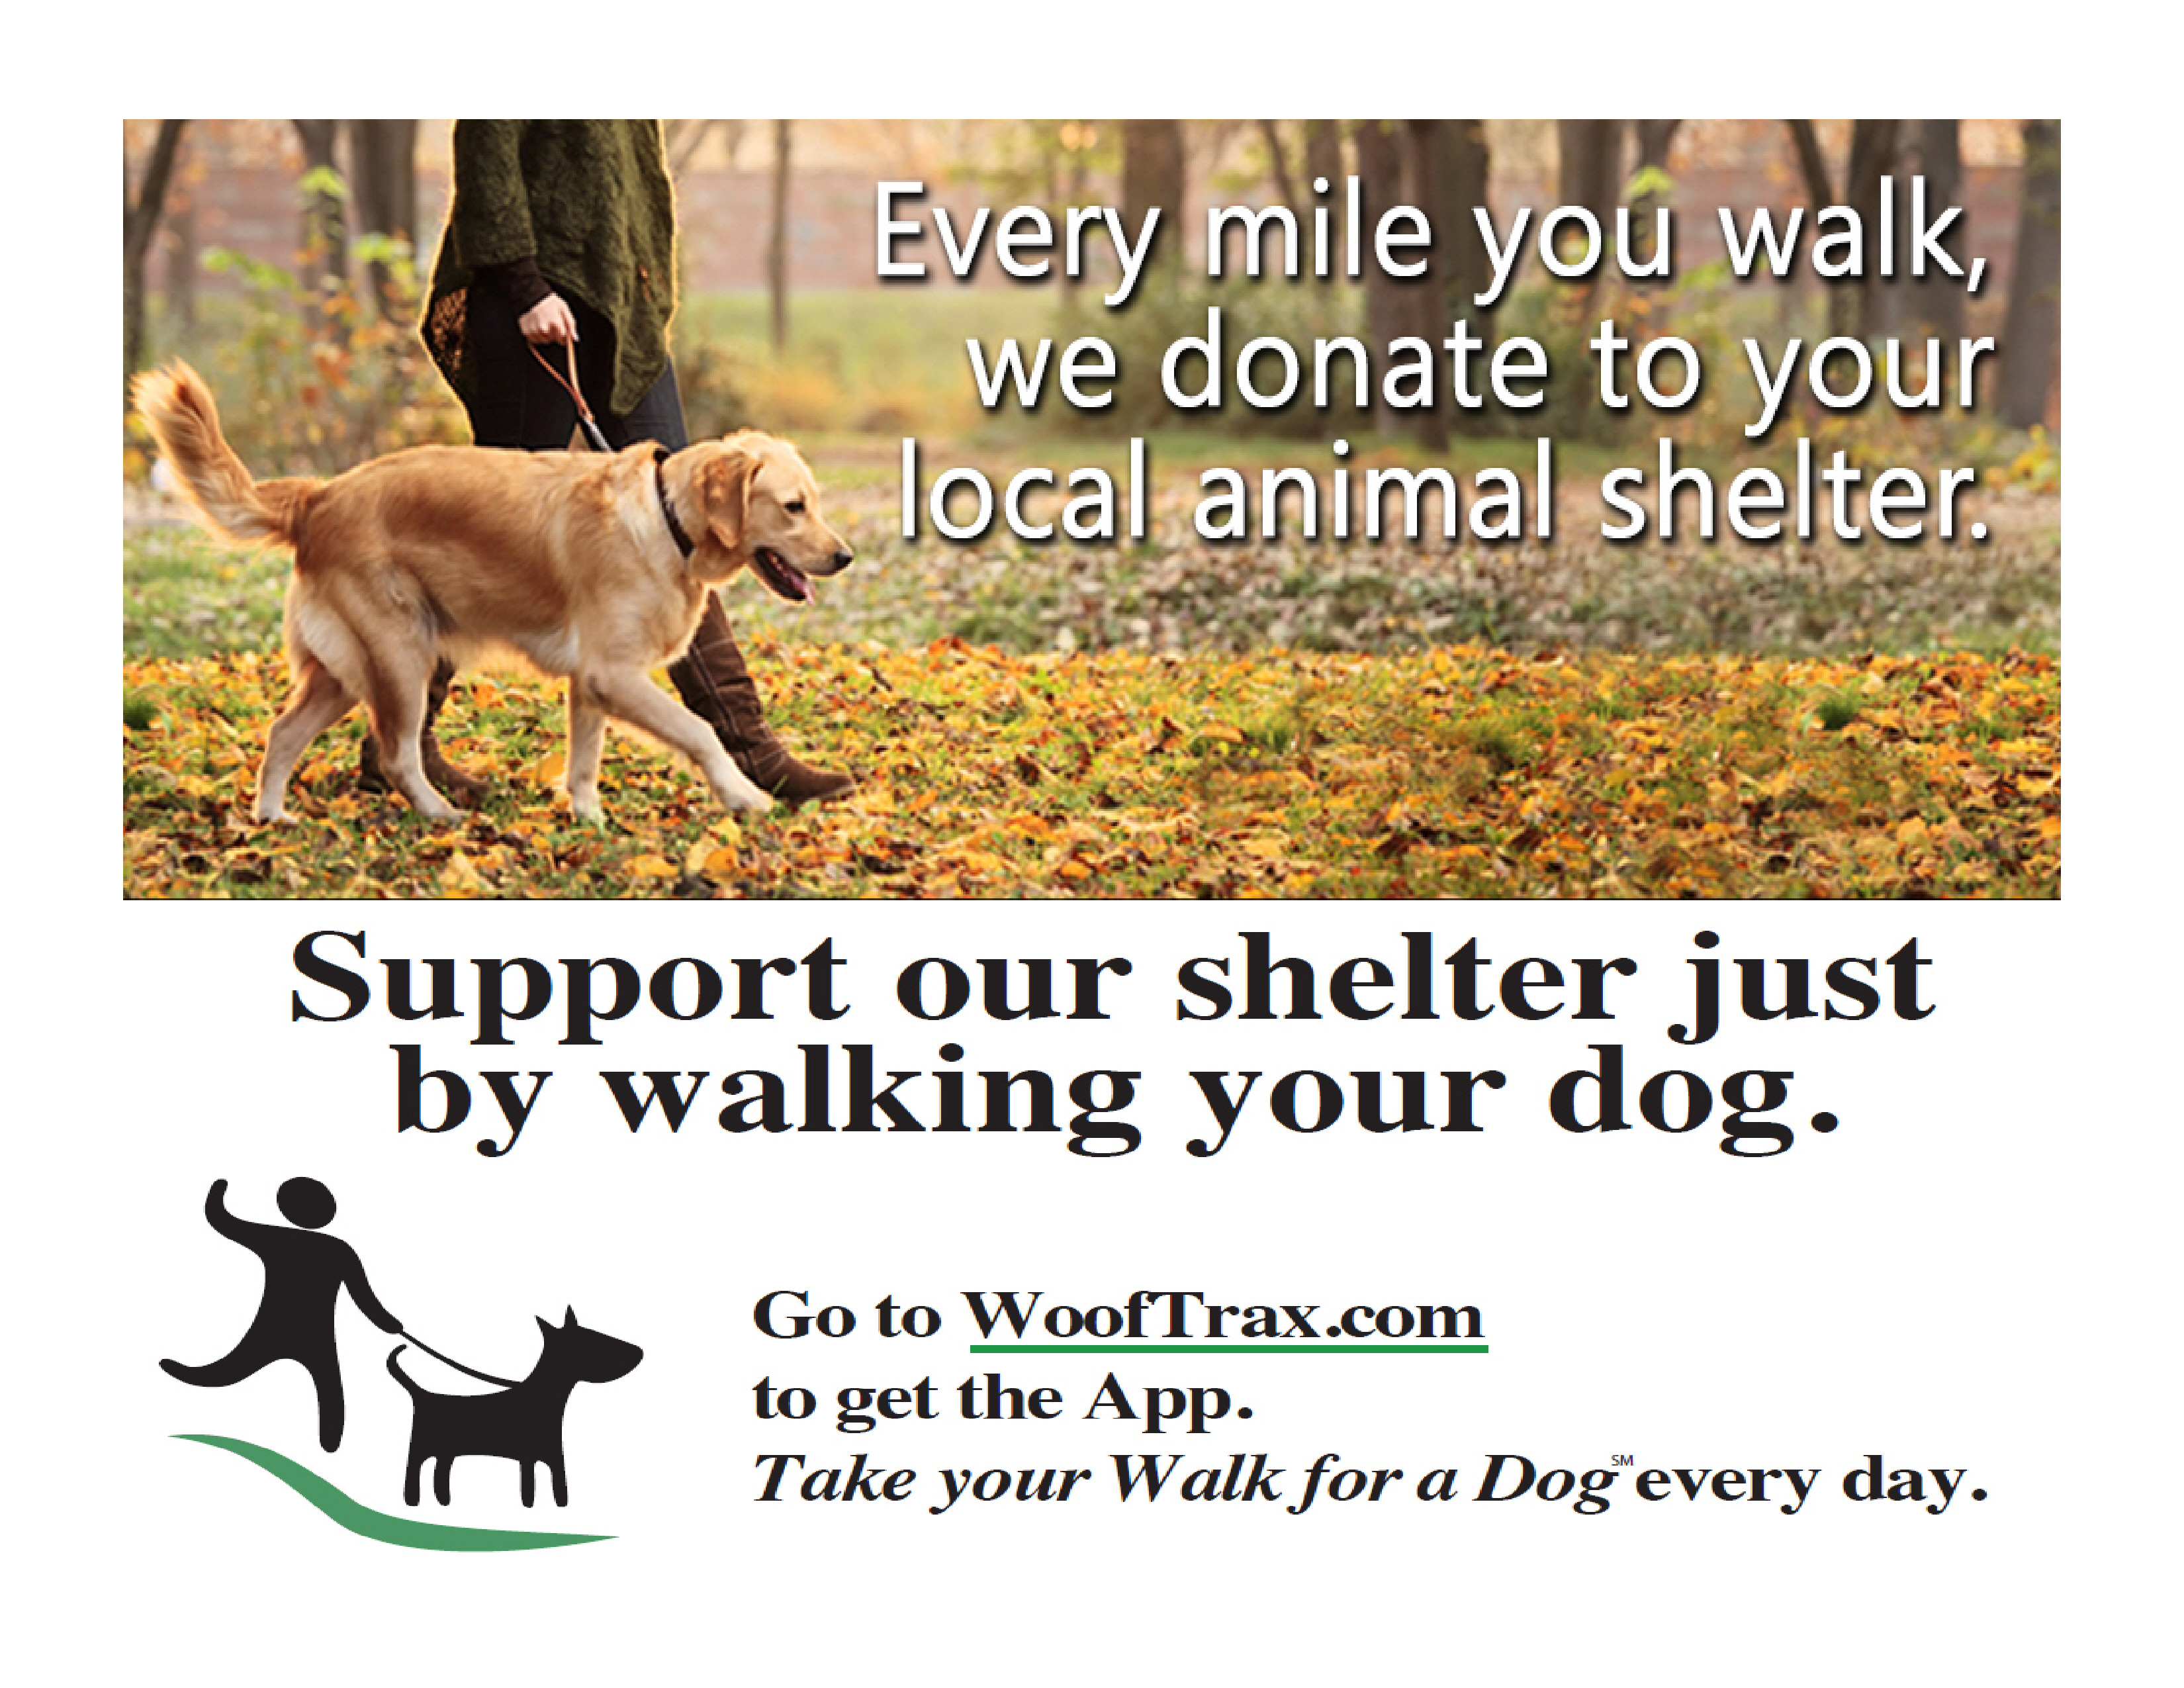 Walk for a dog! - New Albany/Floyd County Animal Shelter